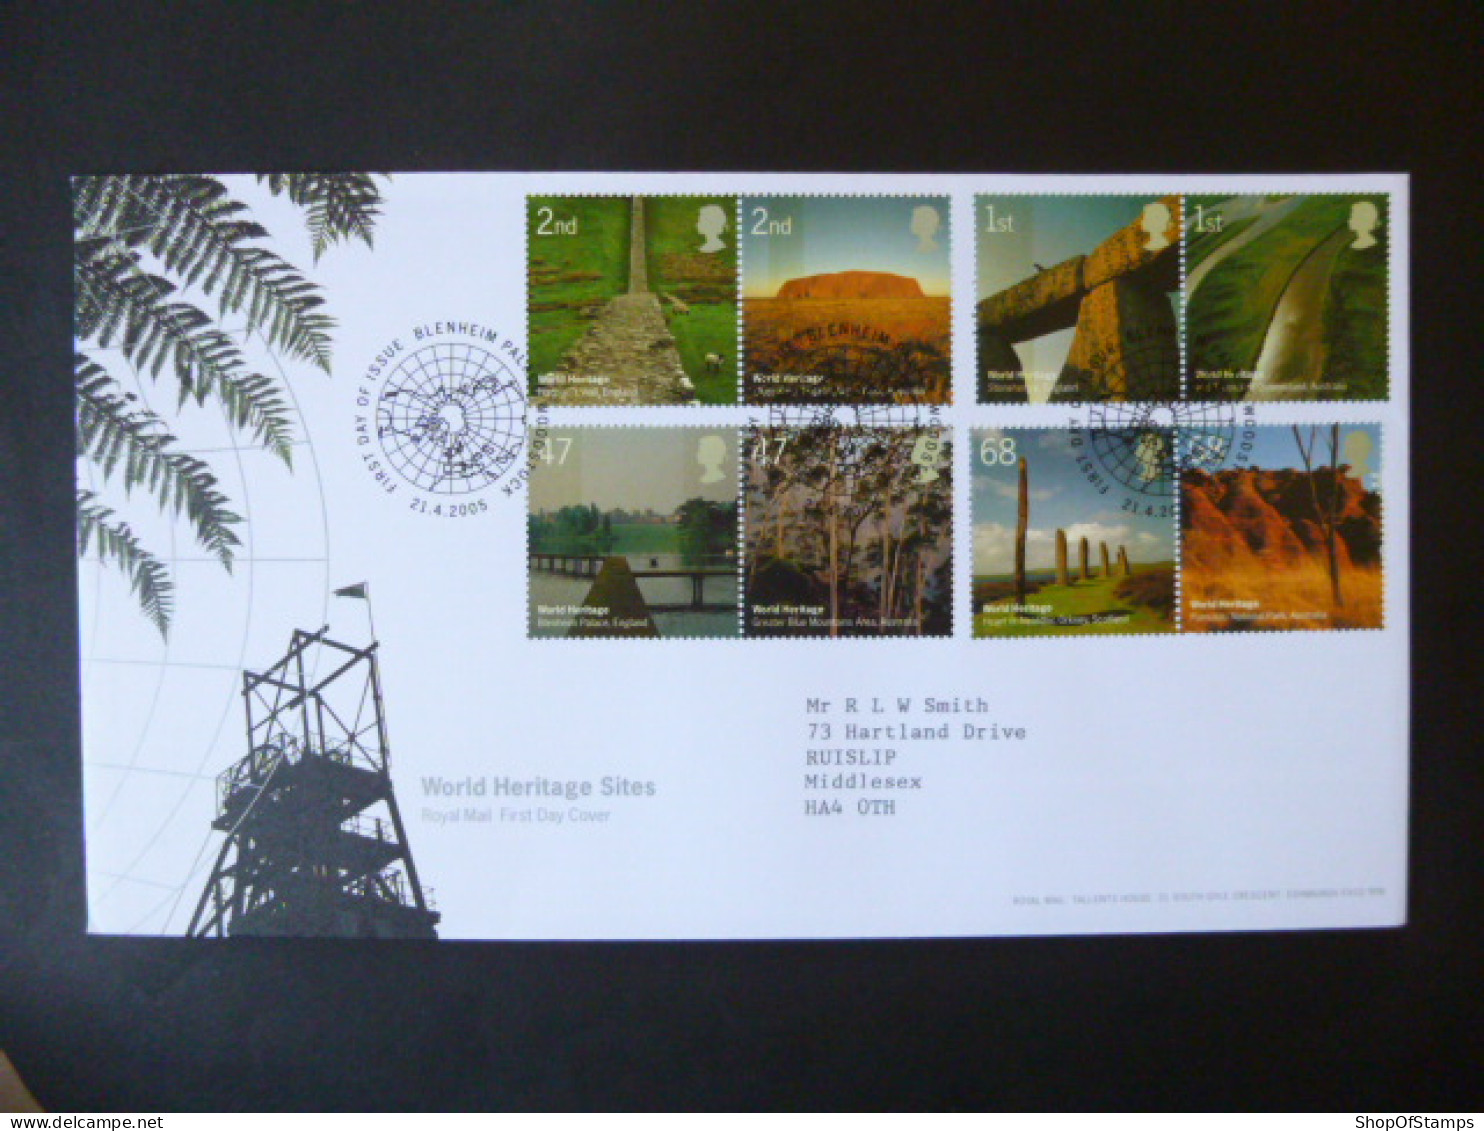 GREAT BRITAIN SG 2532-39 WORLD HERITAGE SITES FDC BLENHEIM PALACE WOODSTOKE - Unclassified